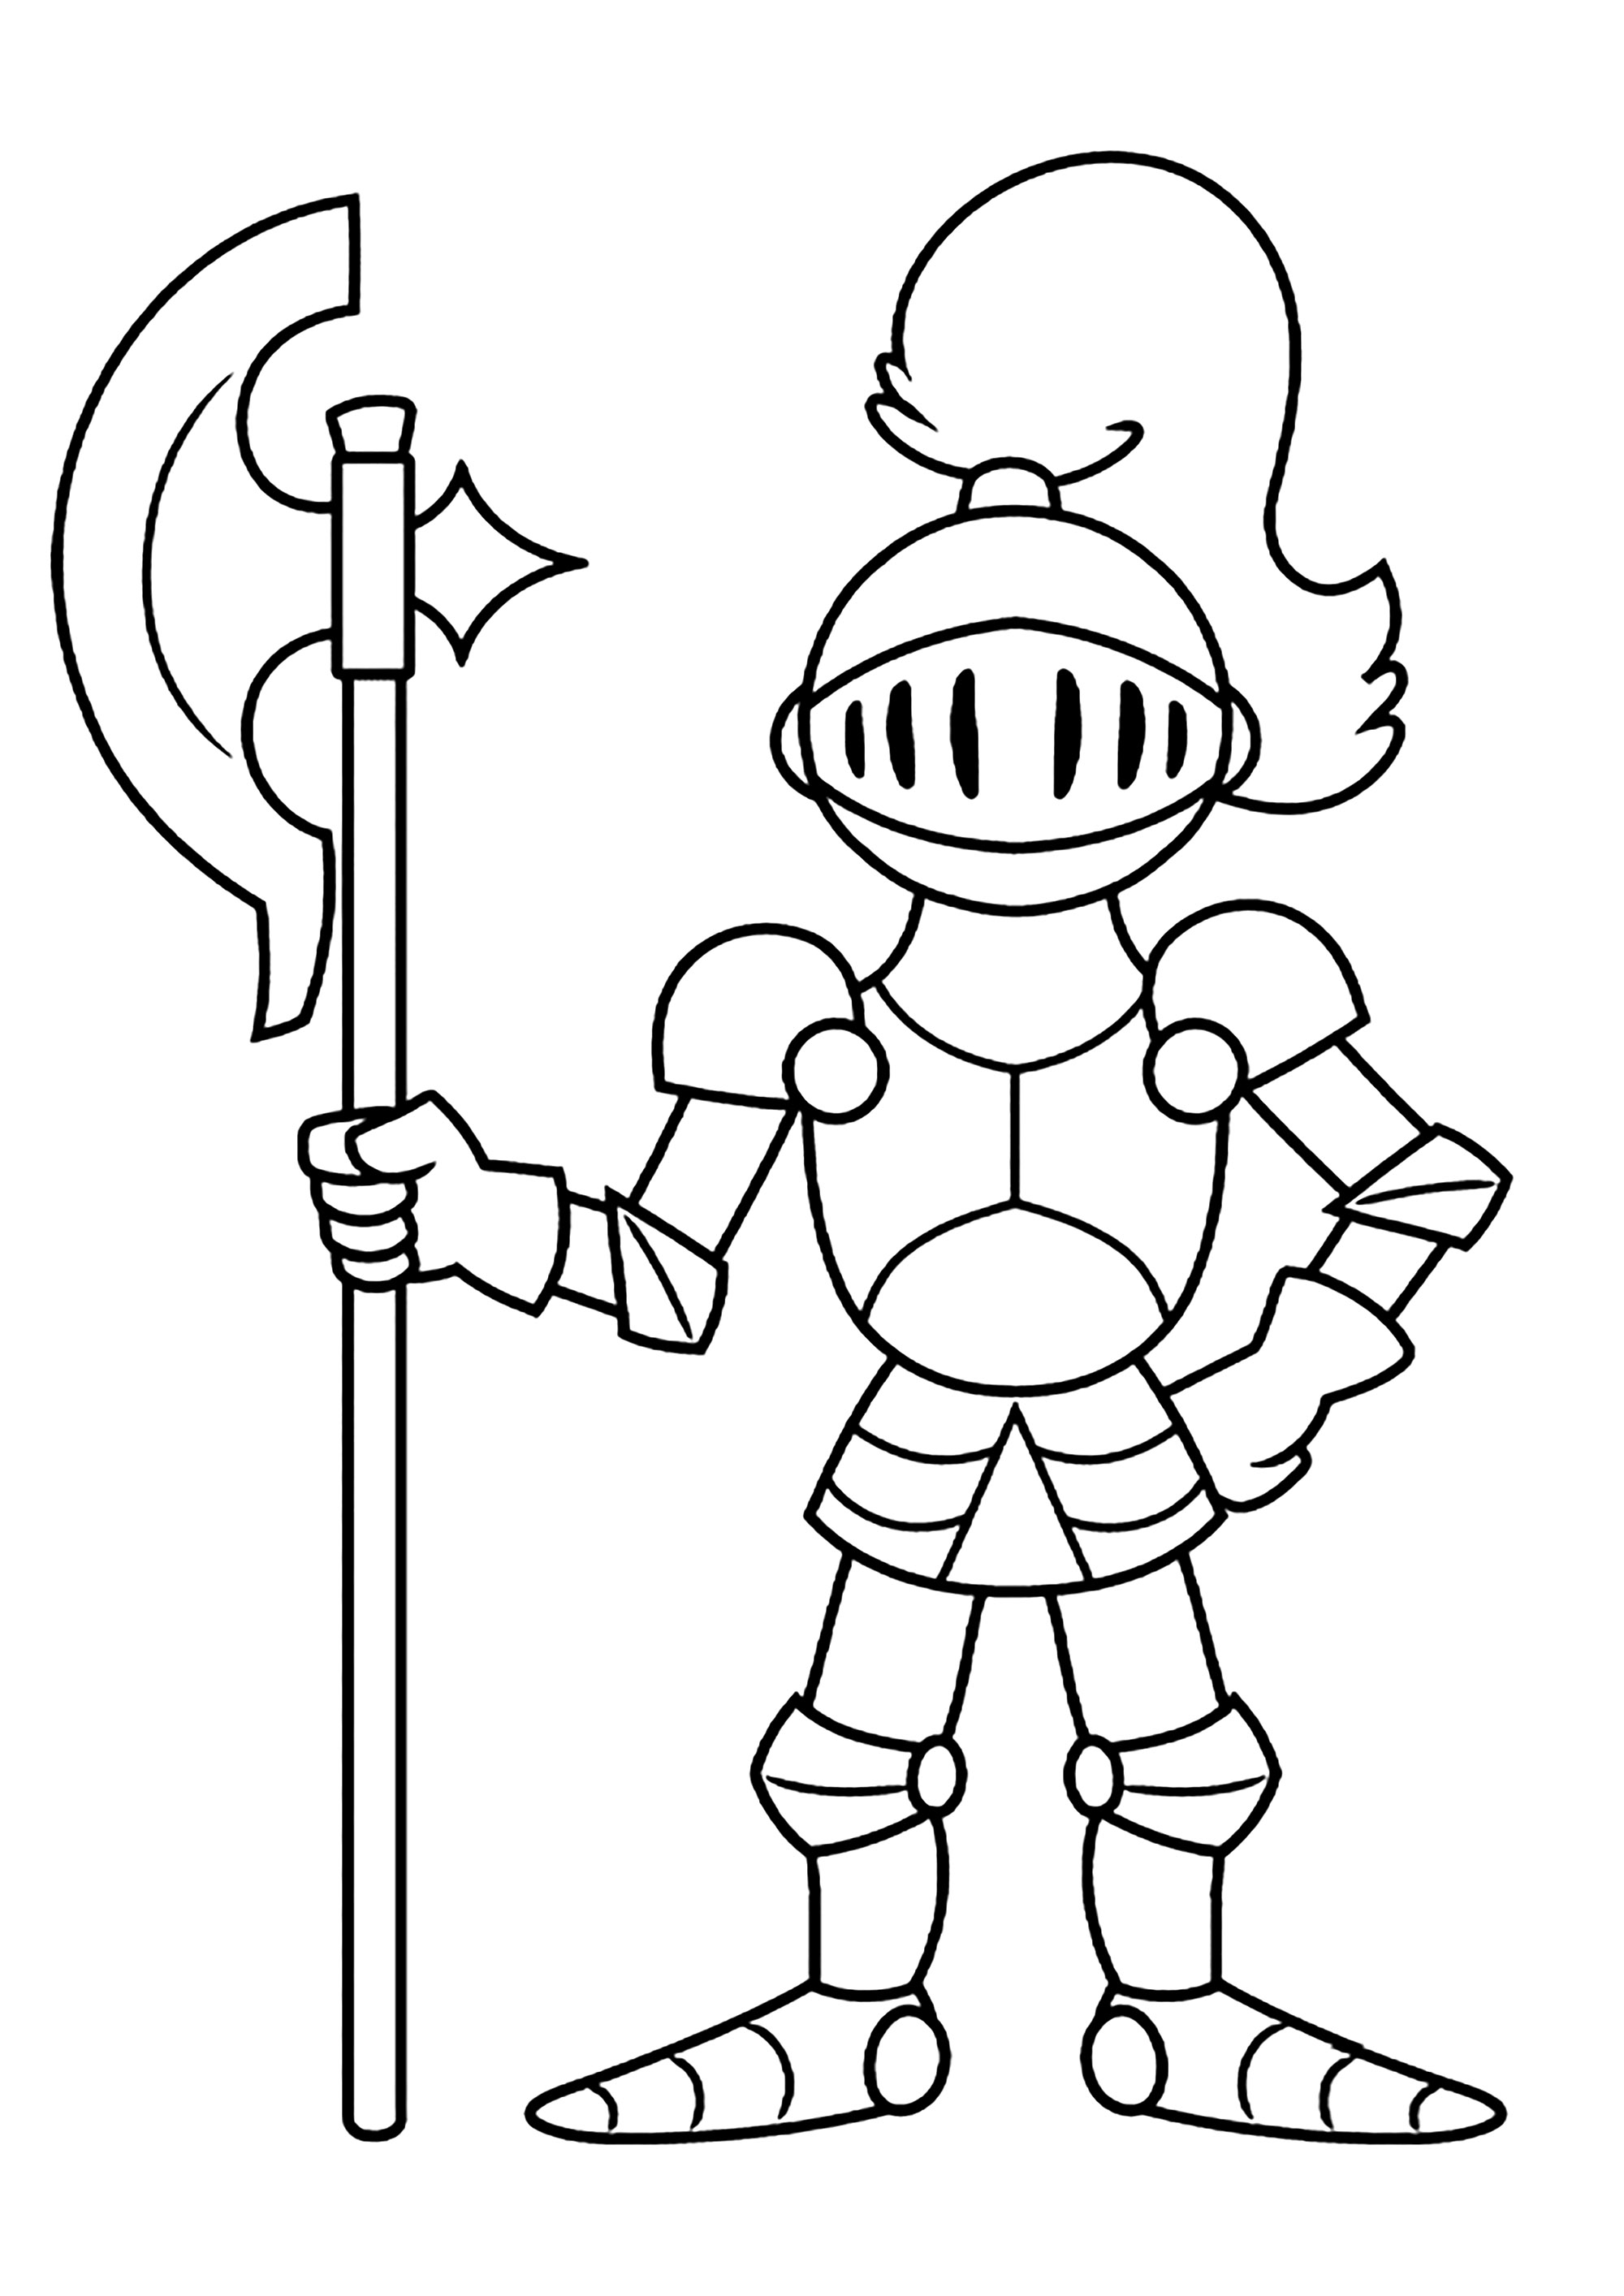 Free Knights, Castles and Dragons coloring page to print and color, for kids